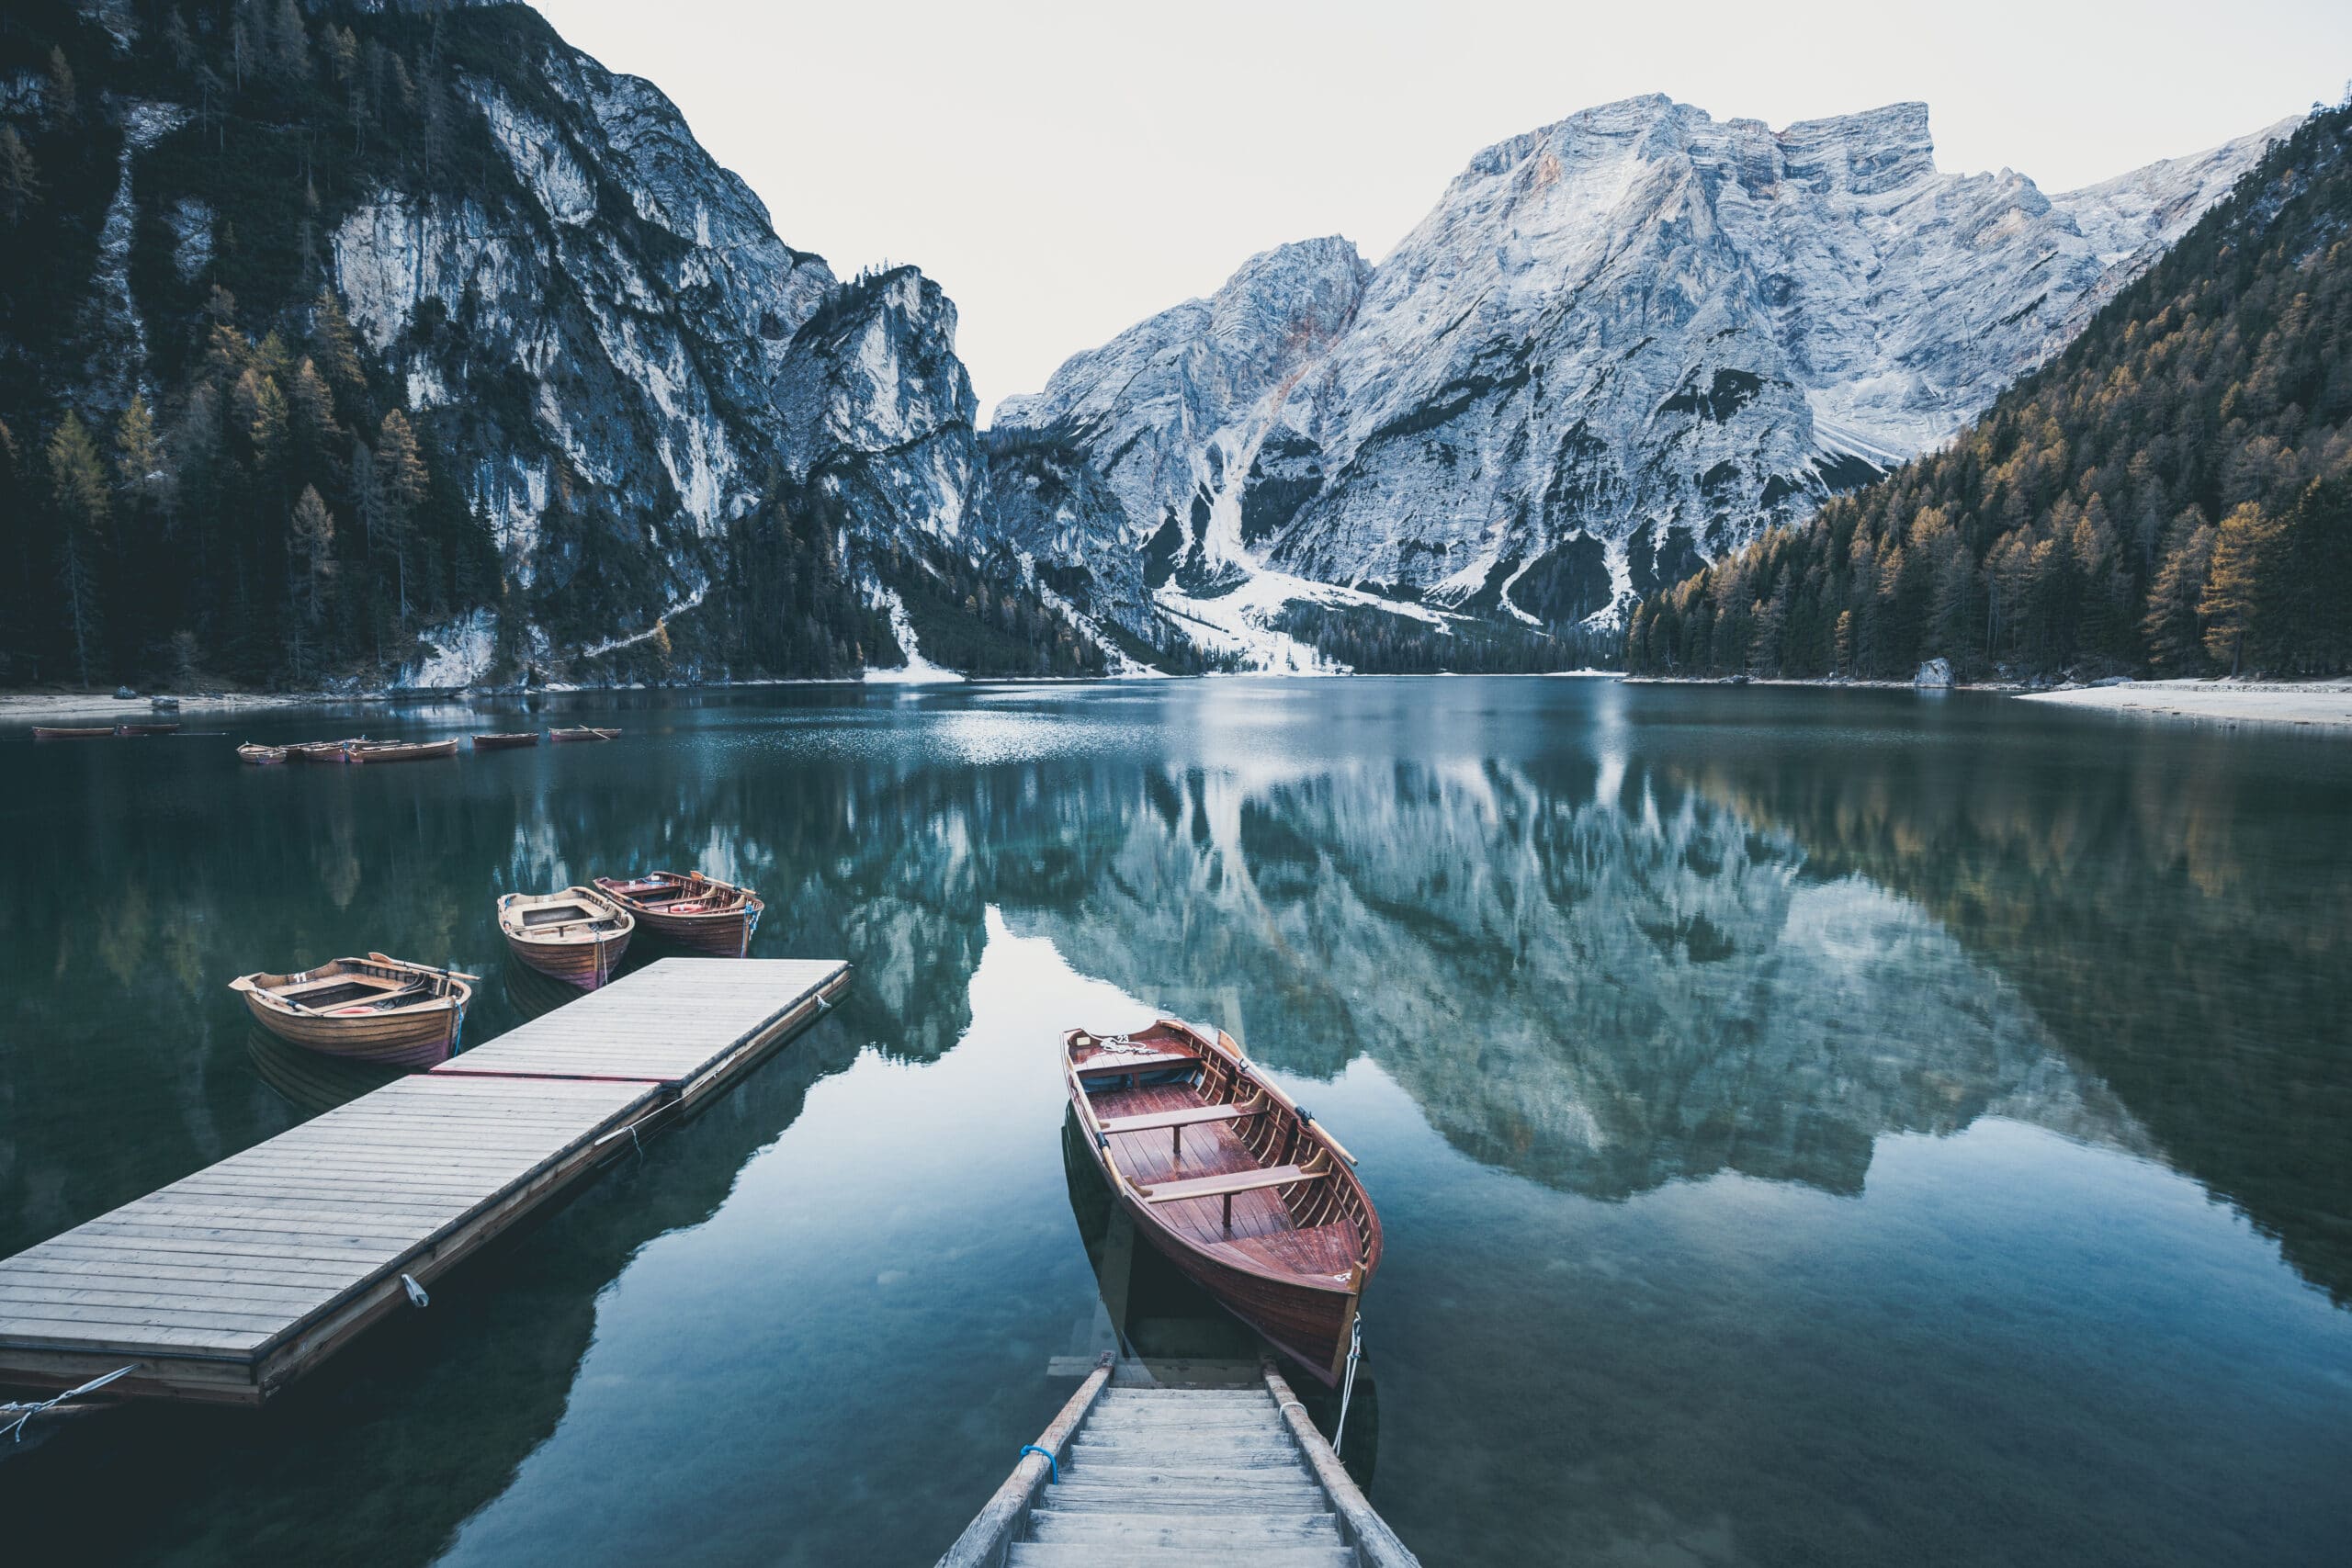 Wooden boat at the alpine mountain lake